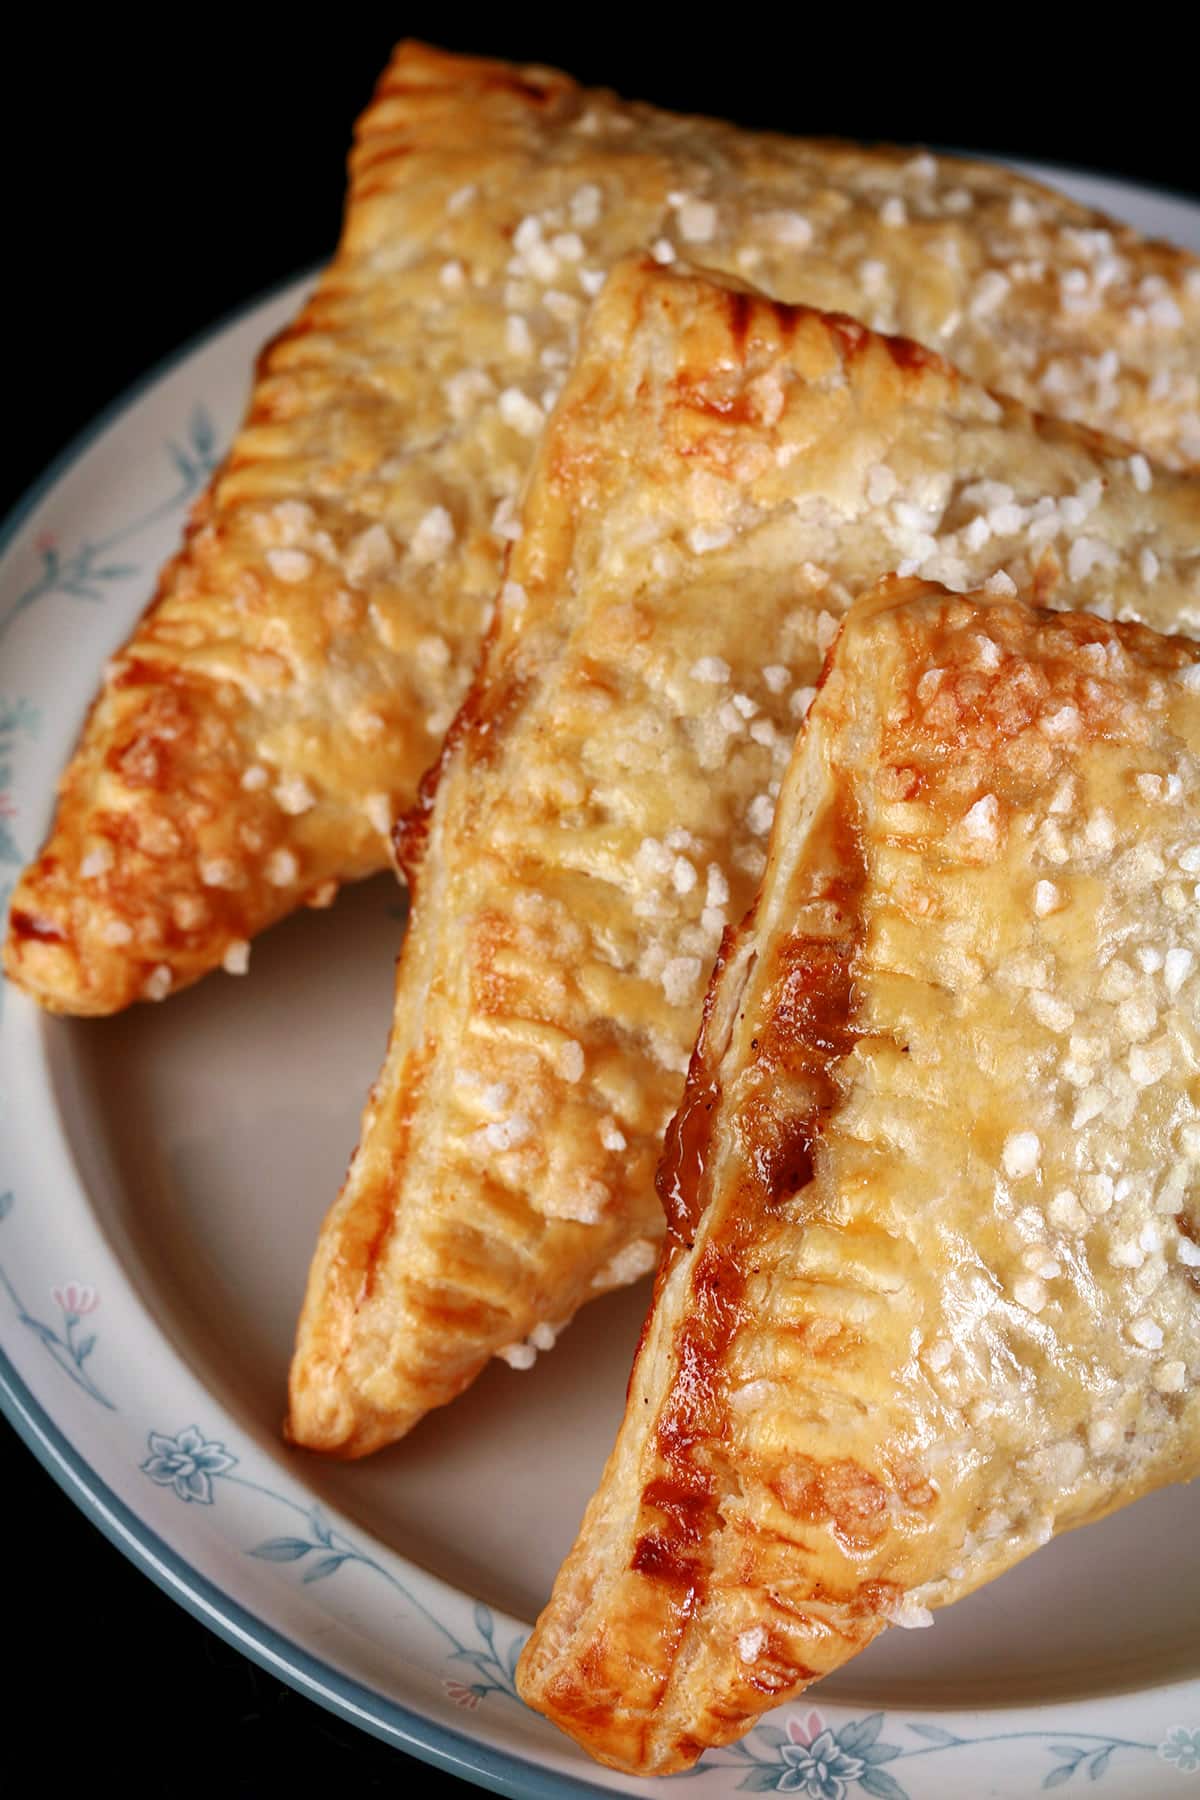 A plate of sugar crusted homemade apple turnovers.